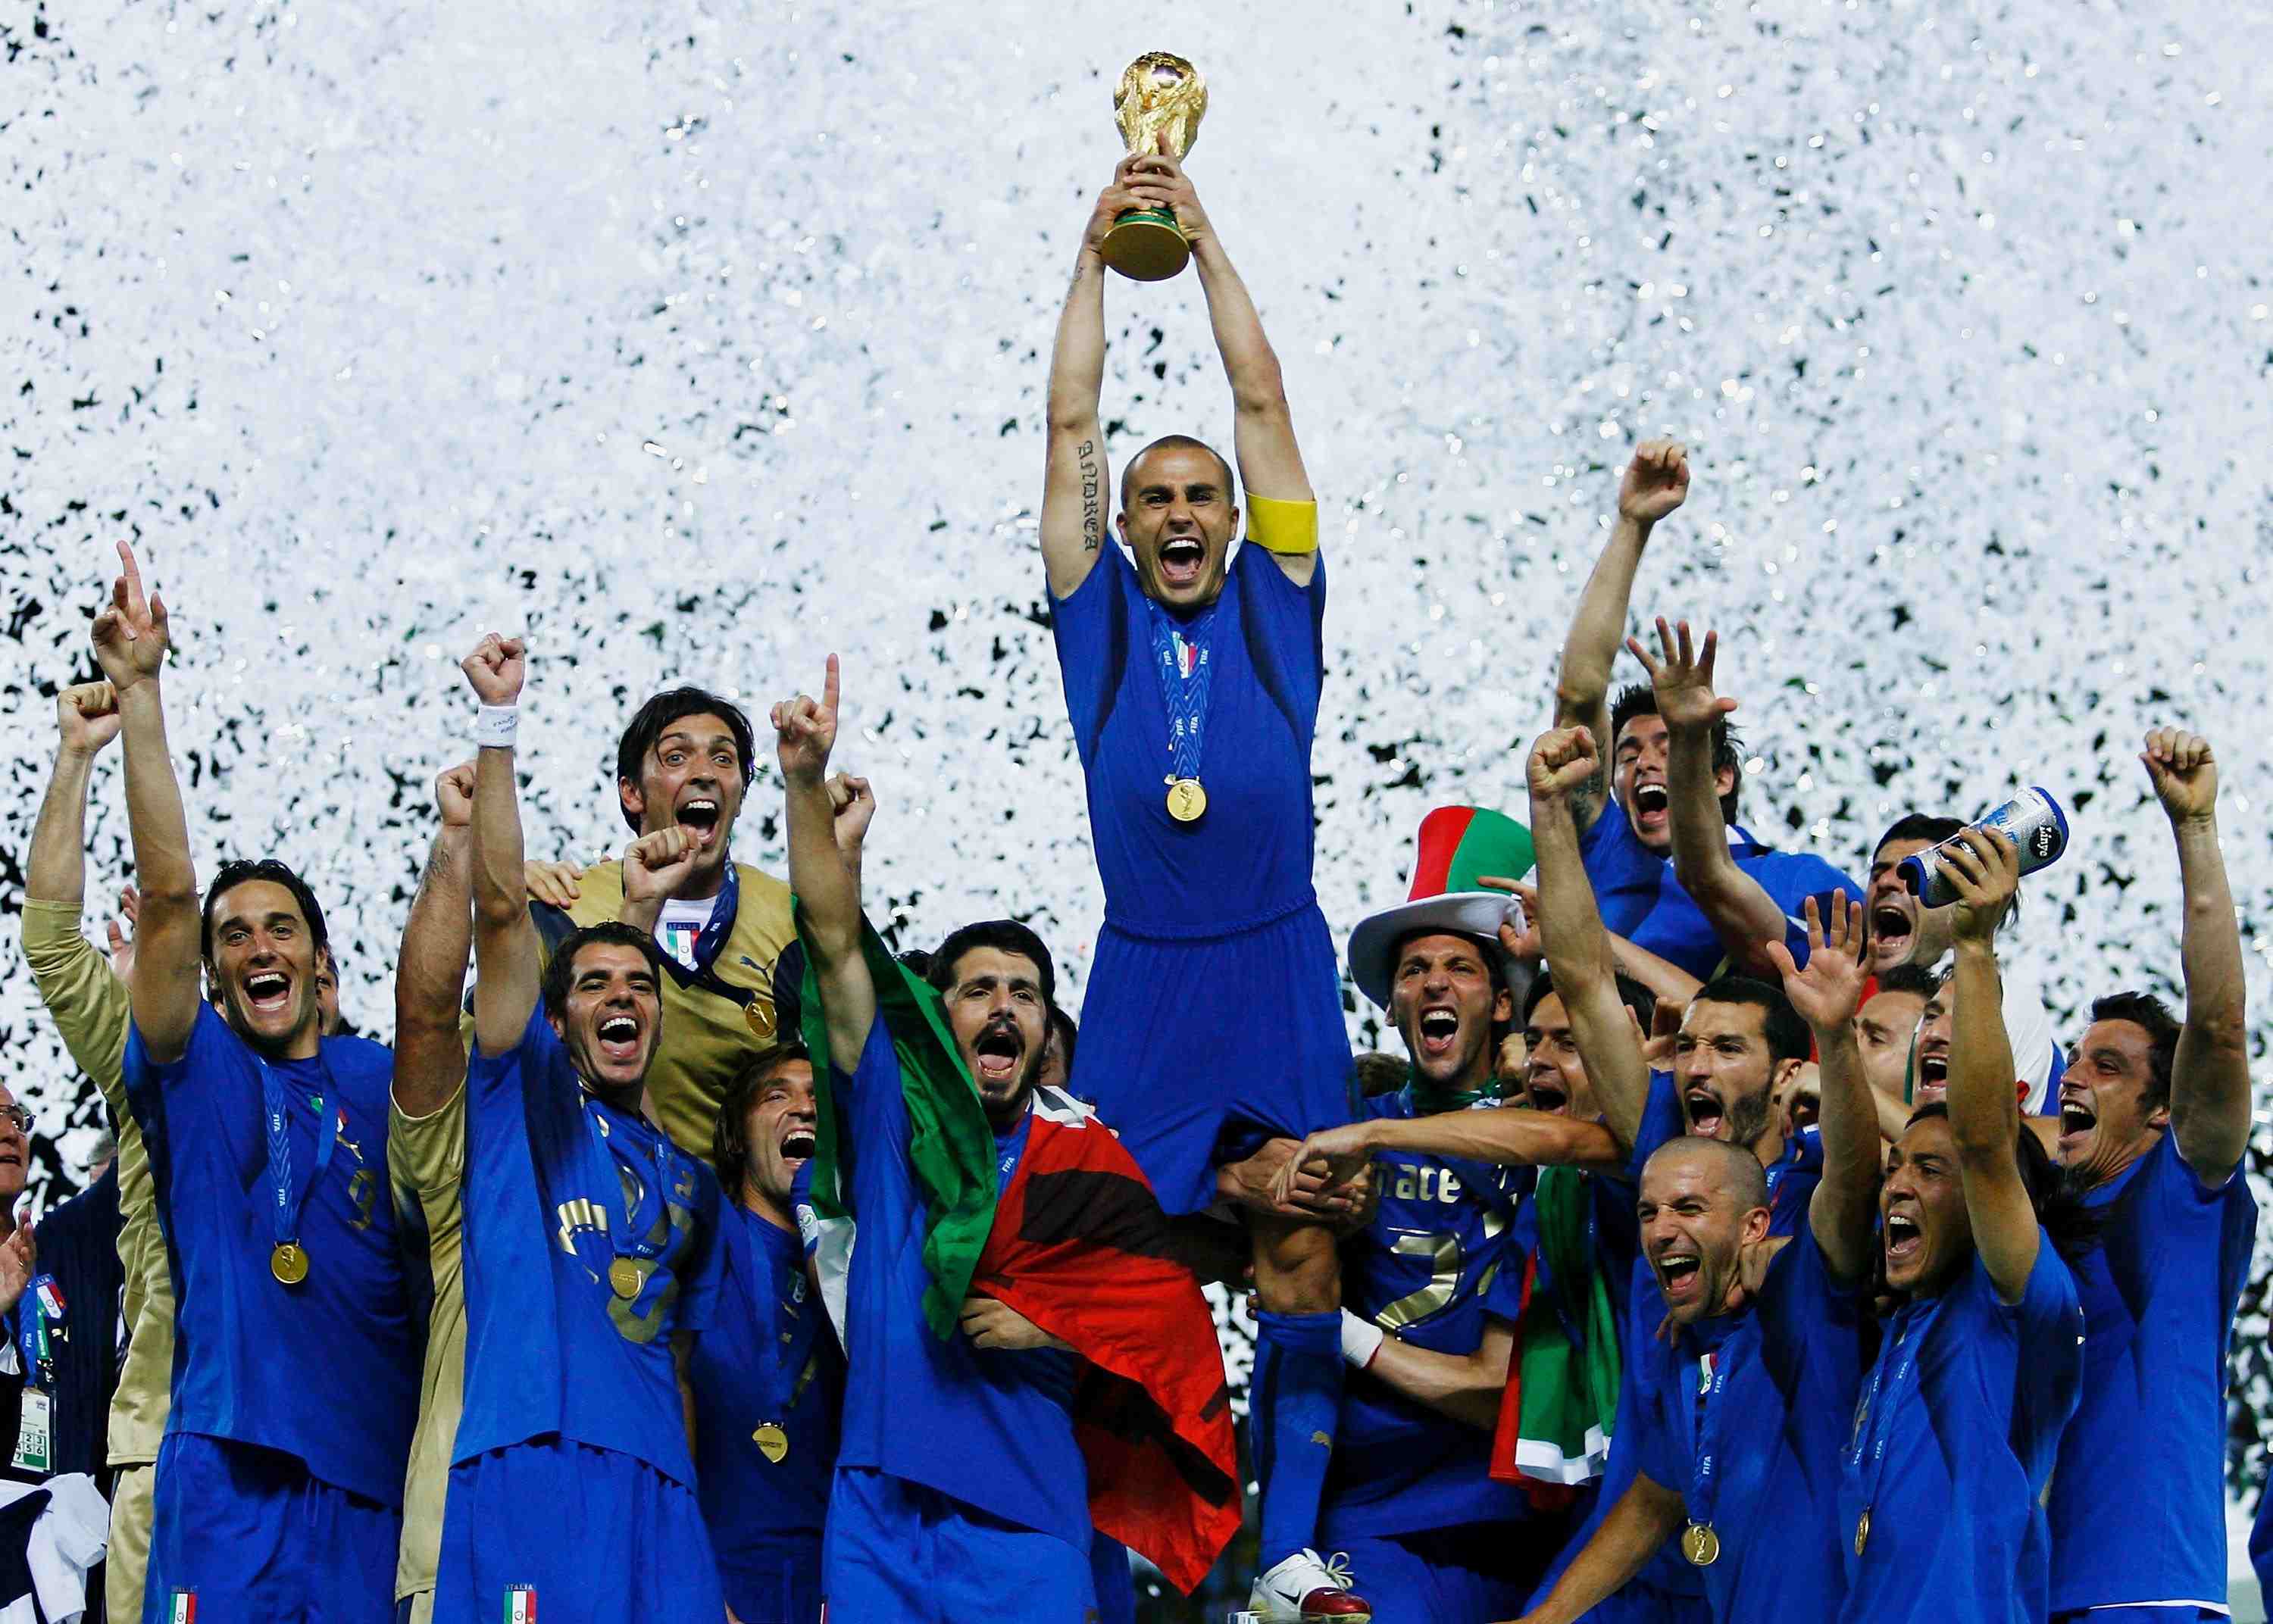 Ten iconic Italy-France moments - Cannavaro goes up for the cup - 2006 - Goal.com